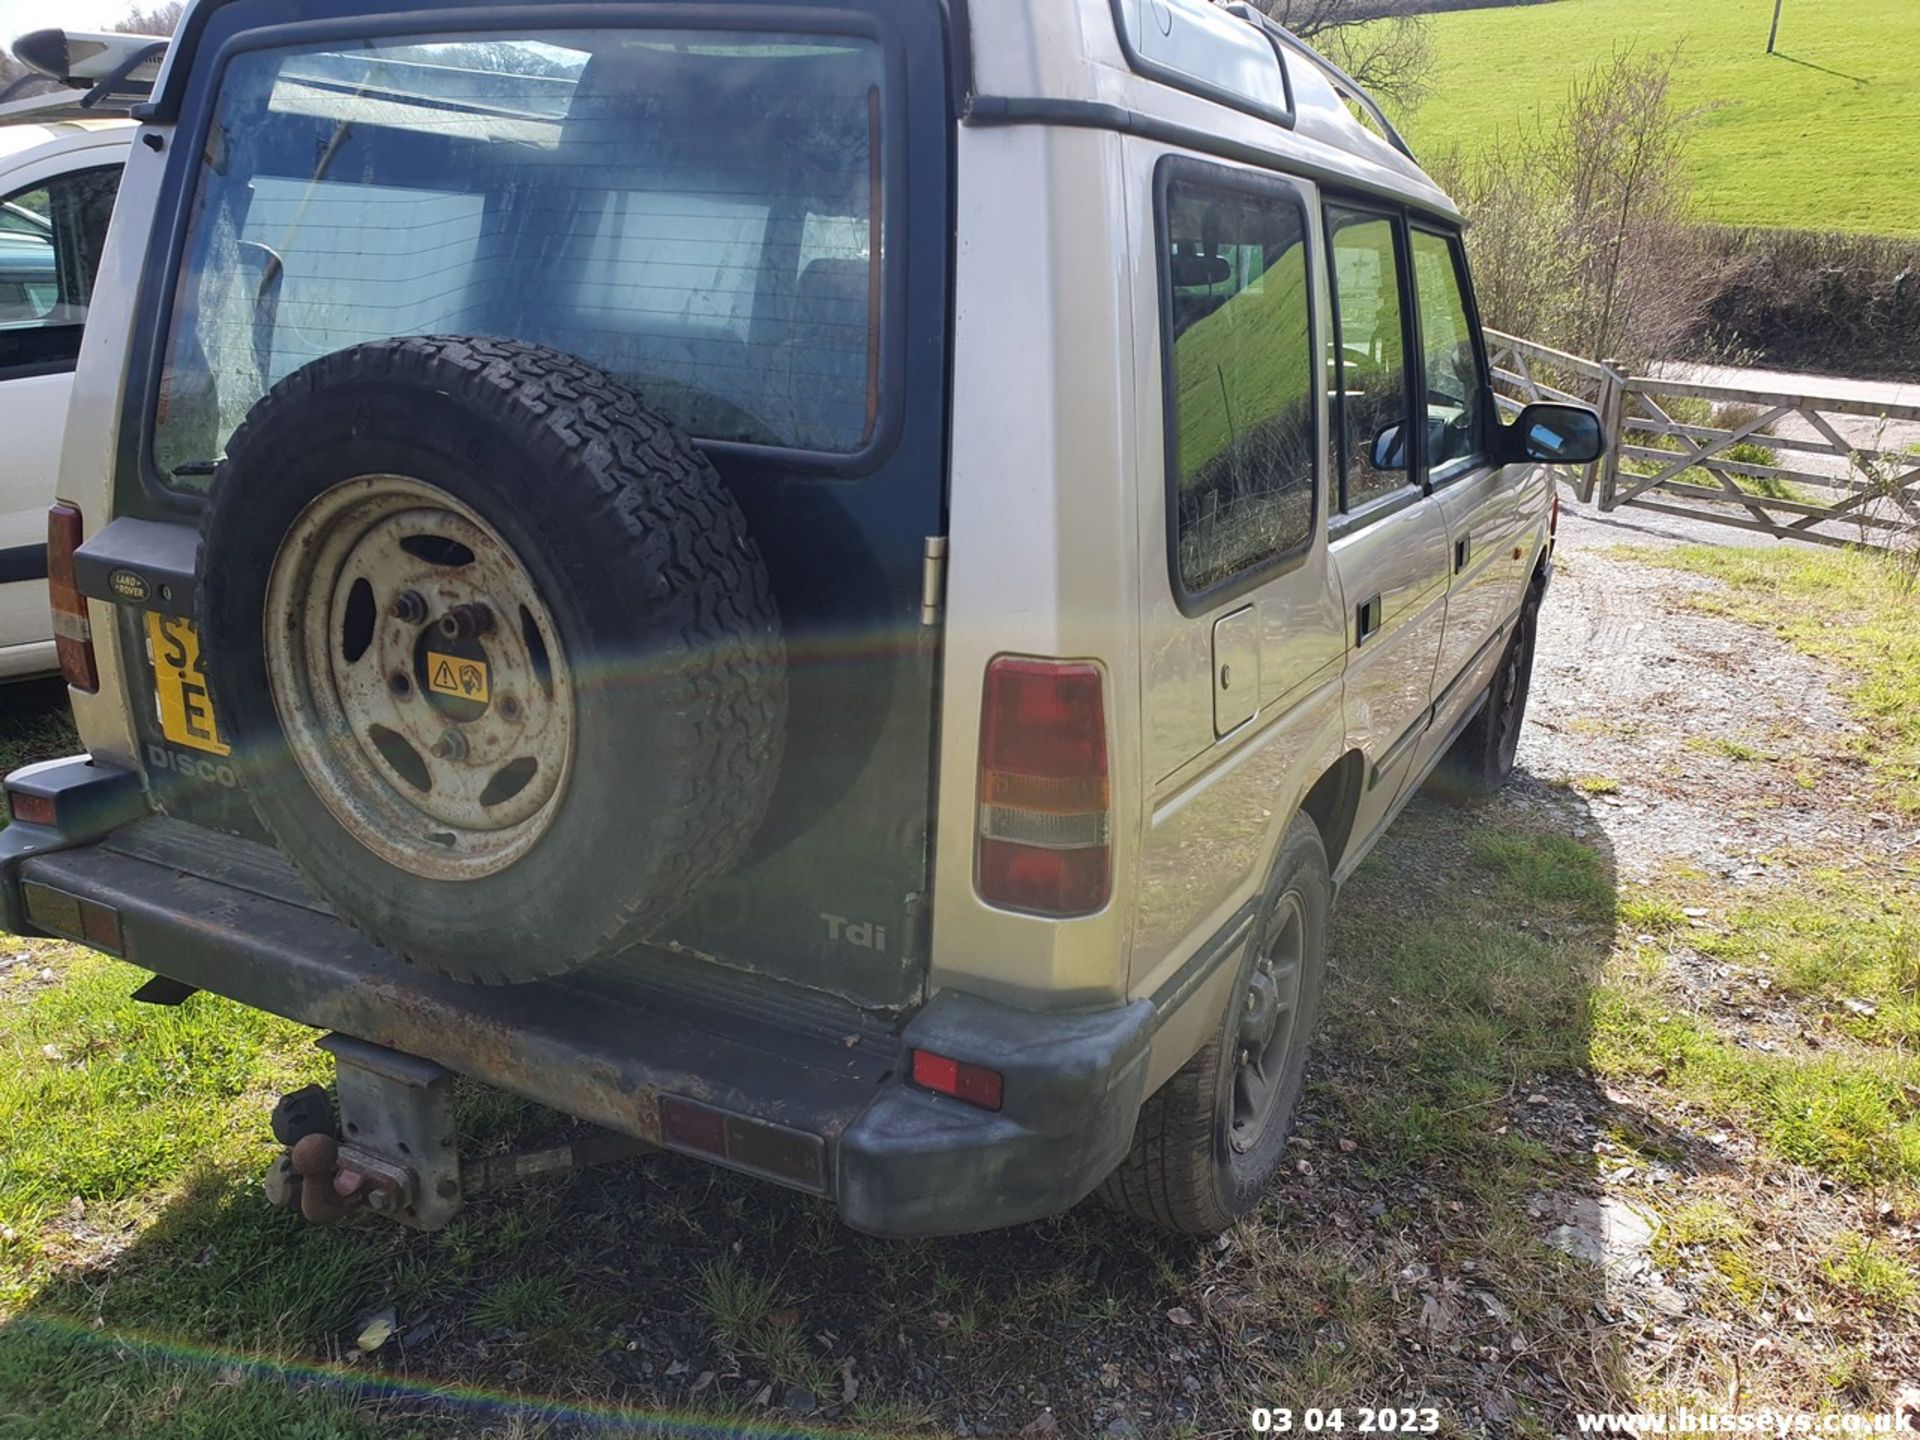 1998 LAND ROVER DISCOVERY ES TDI - 2495cc 5dr Estate (Gold) - Image 13 of 31